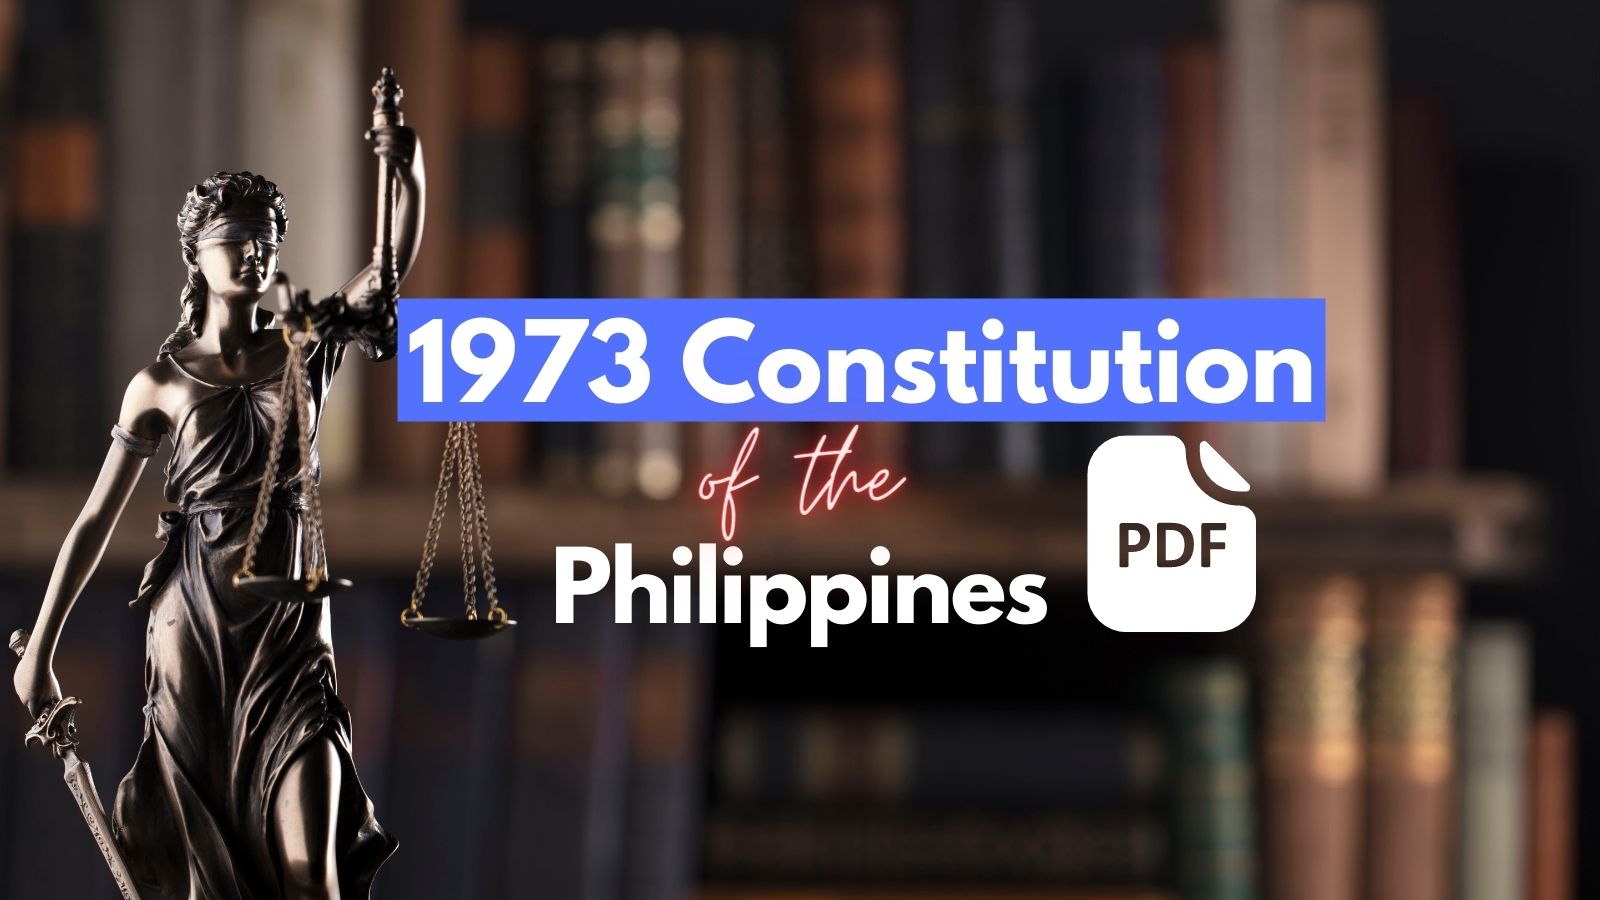 The 1973 Constitution of the Philippines PDF and Summary